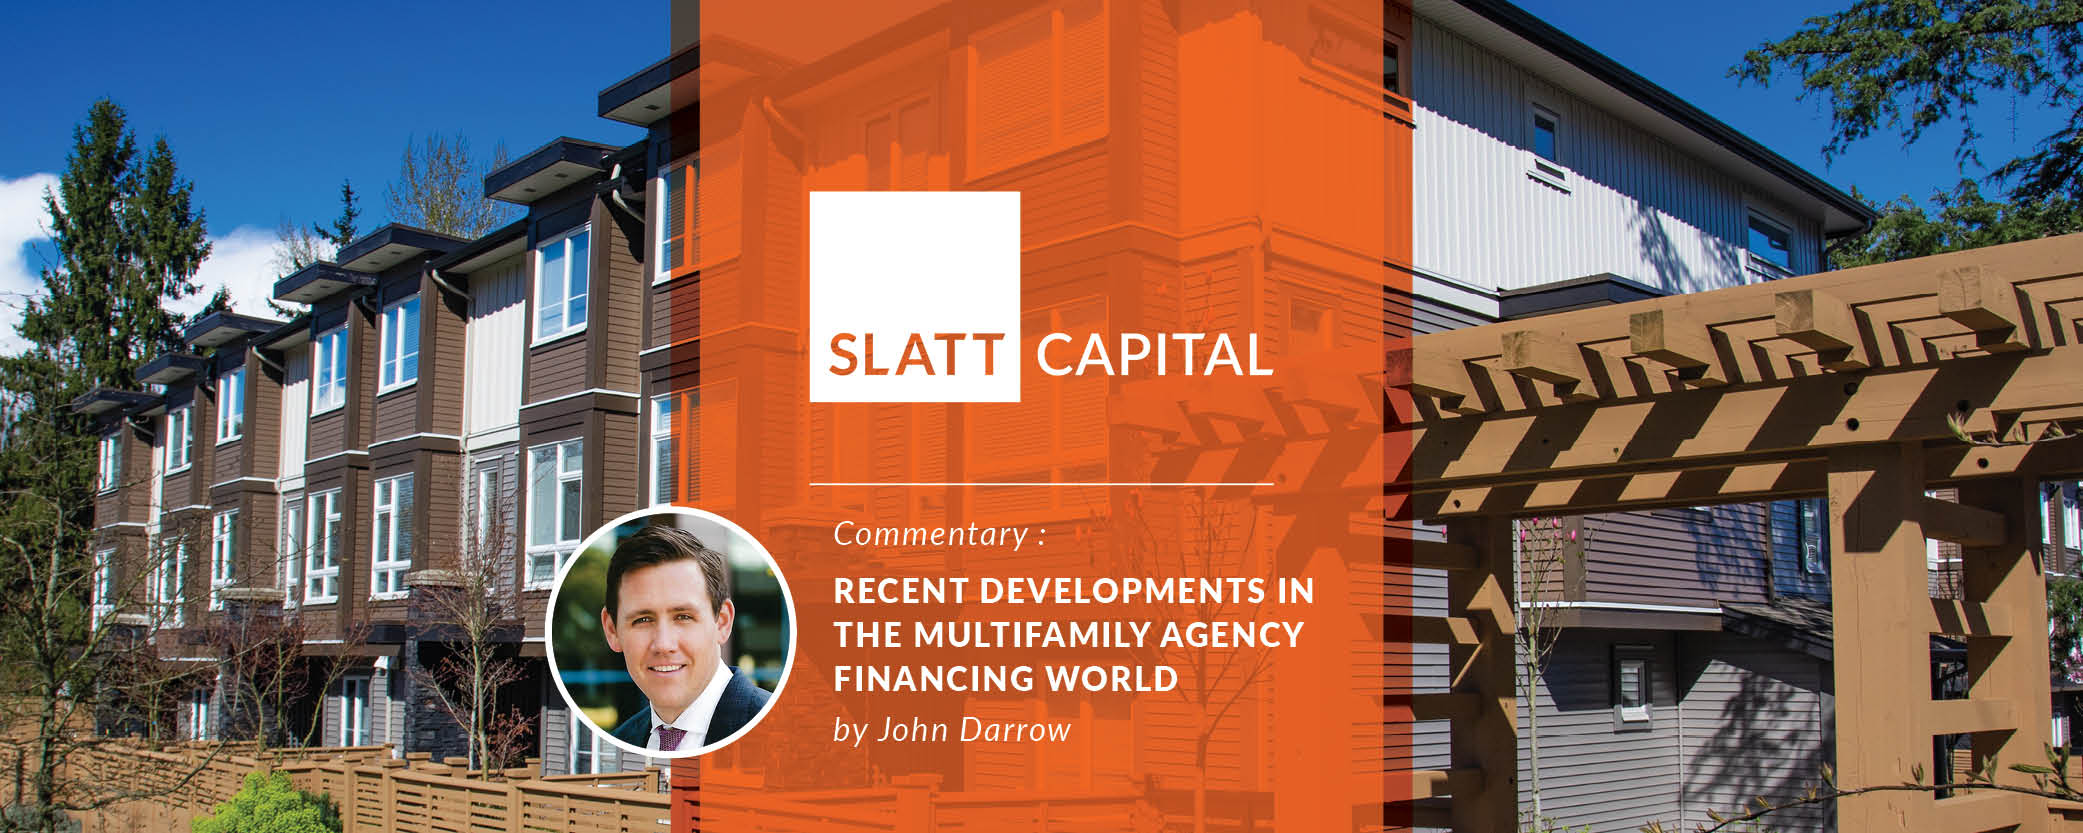 Commentary on recent developments in the multifamily agency financing world